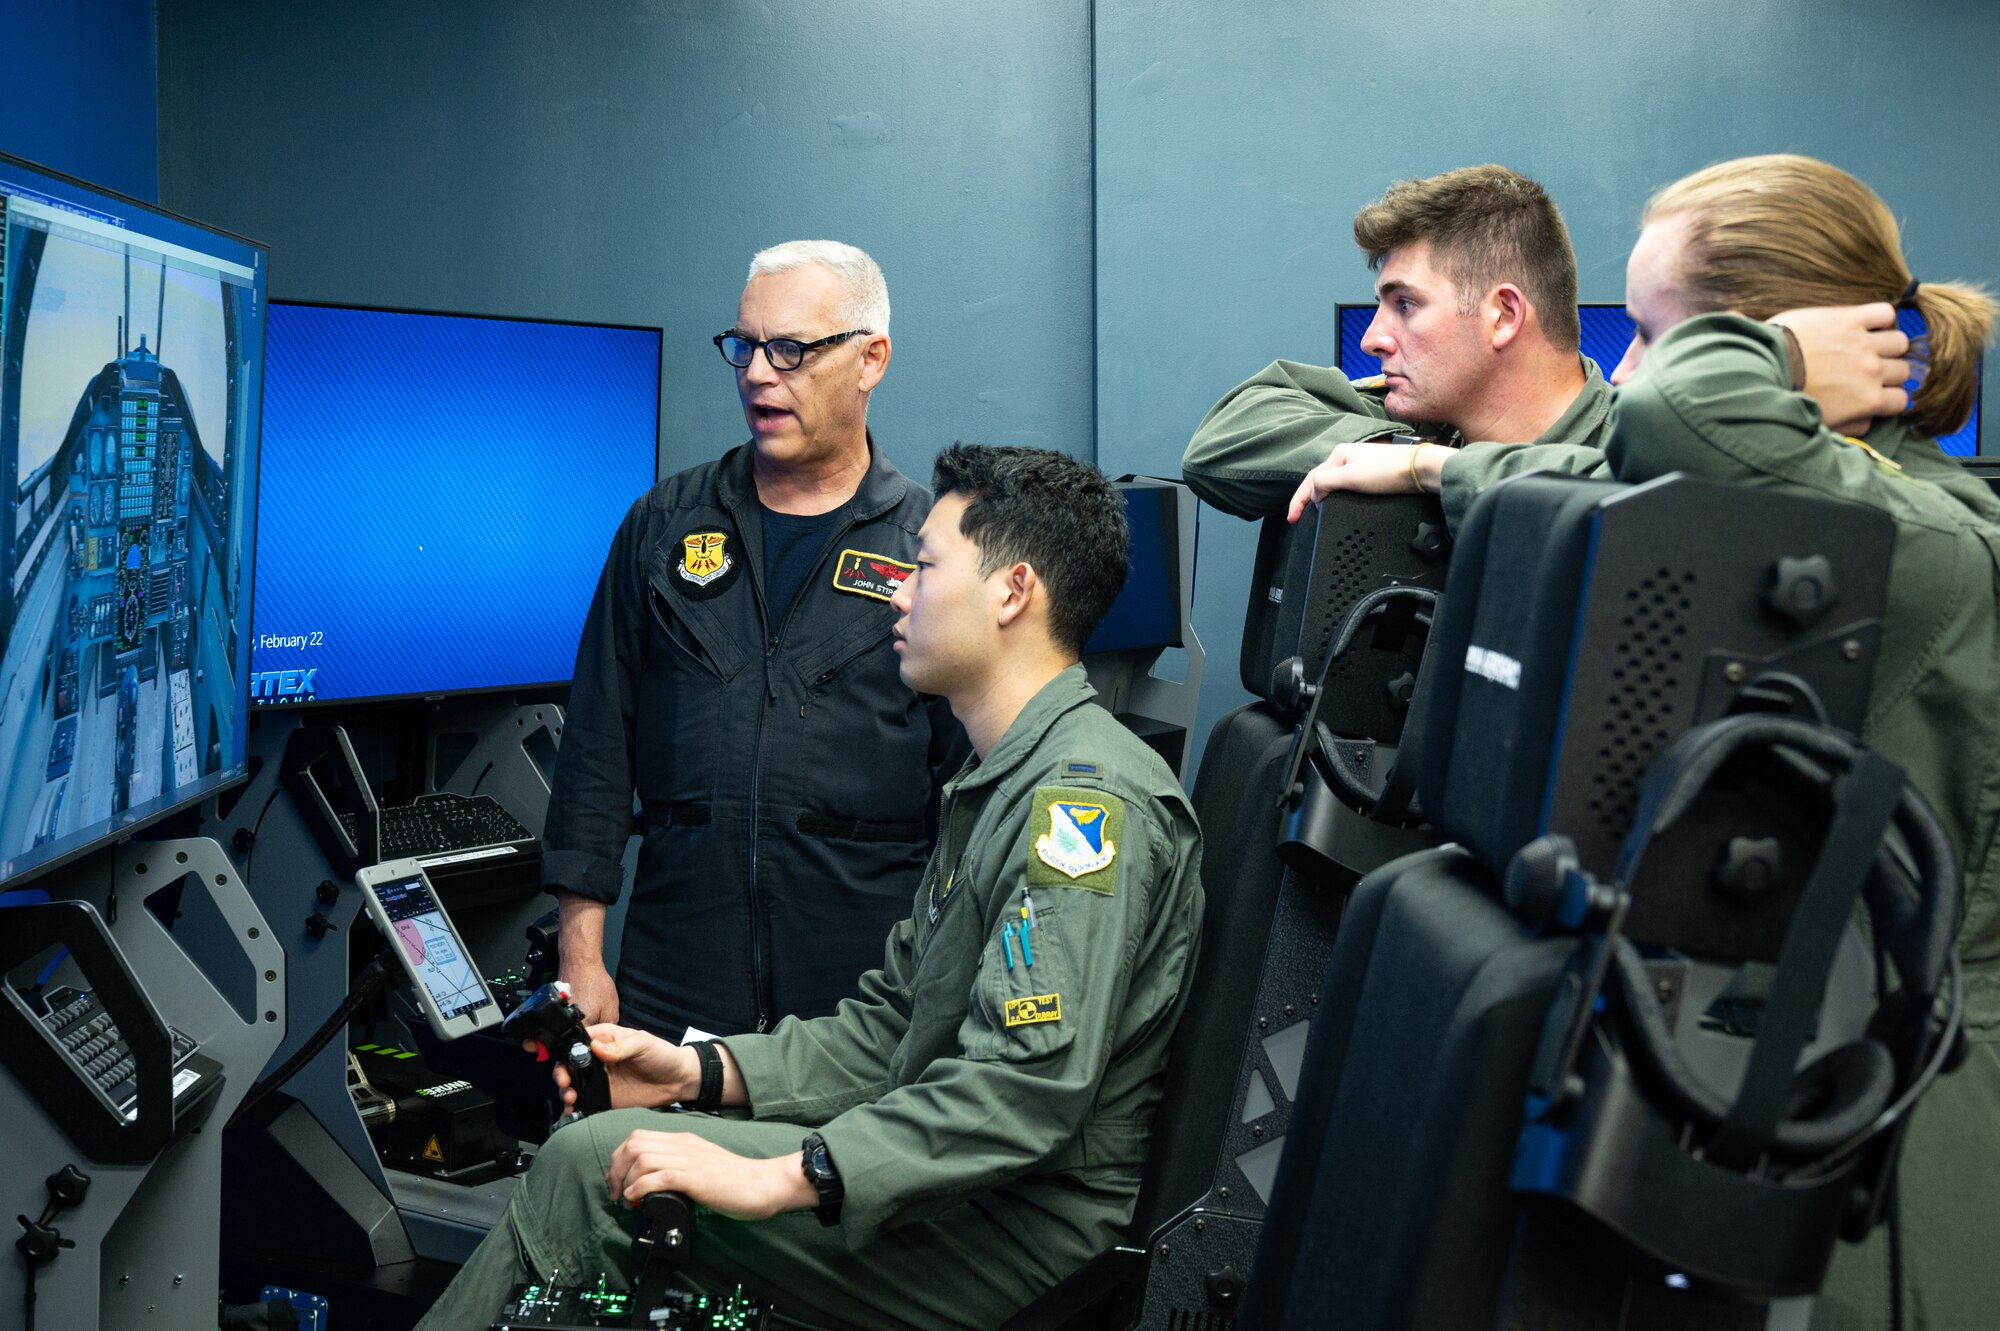 John Stipo (left), 47th Operation Group simulator instructor, informs undergraduate pilot training students on the basics of flying a T-38 Talon using a simulator on Feb. 22, 2023, at Laughlin Air Force, Texas. Laughlin uses top-of-the-line simulators to simulate different aircraft, environments, and
scenarios. (U.S. Air Force photo by Senior Airman David Phaff)